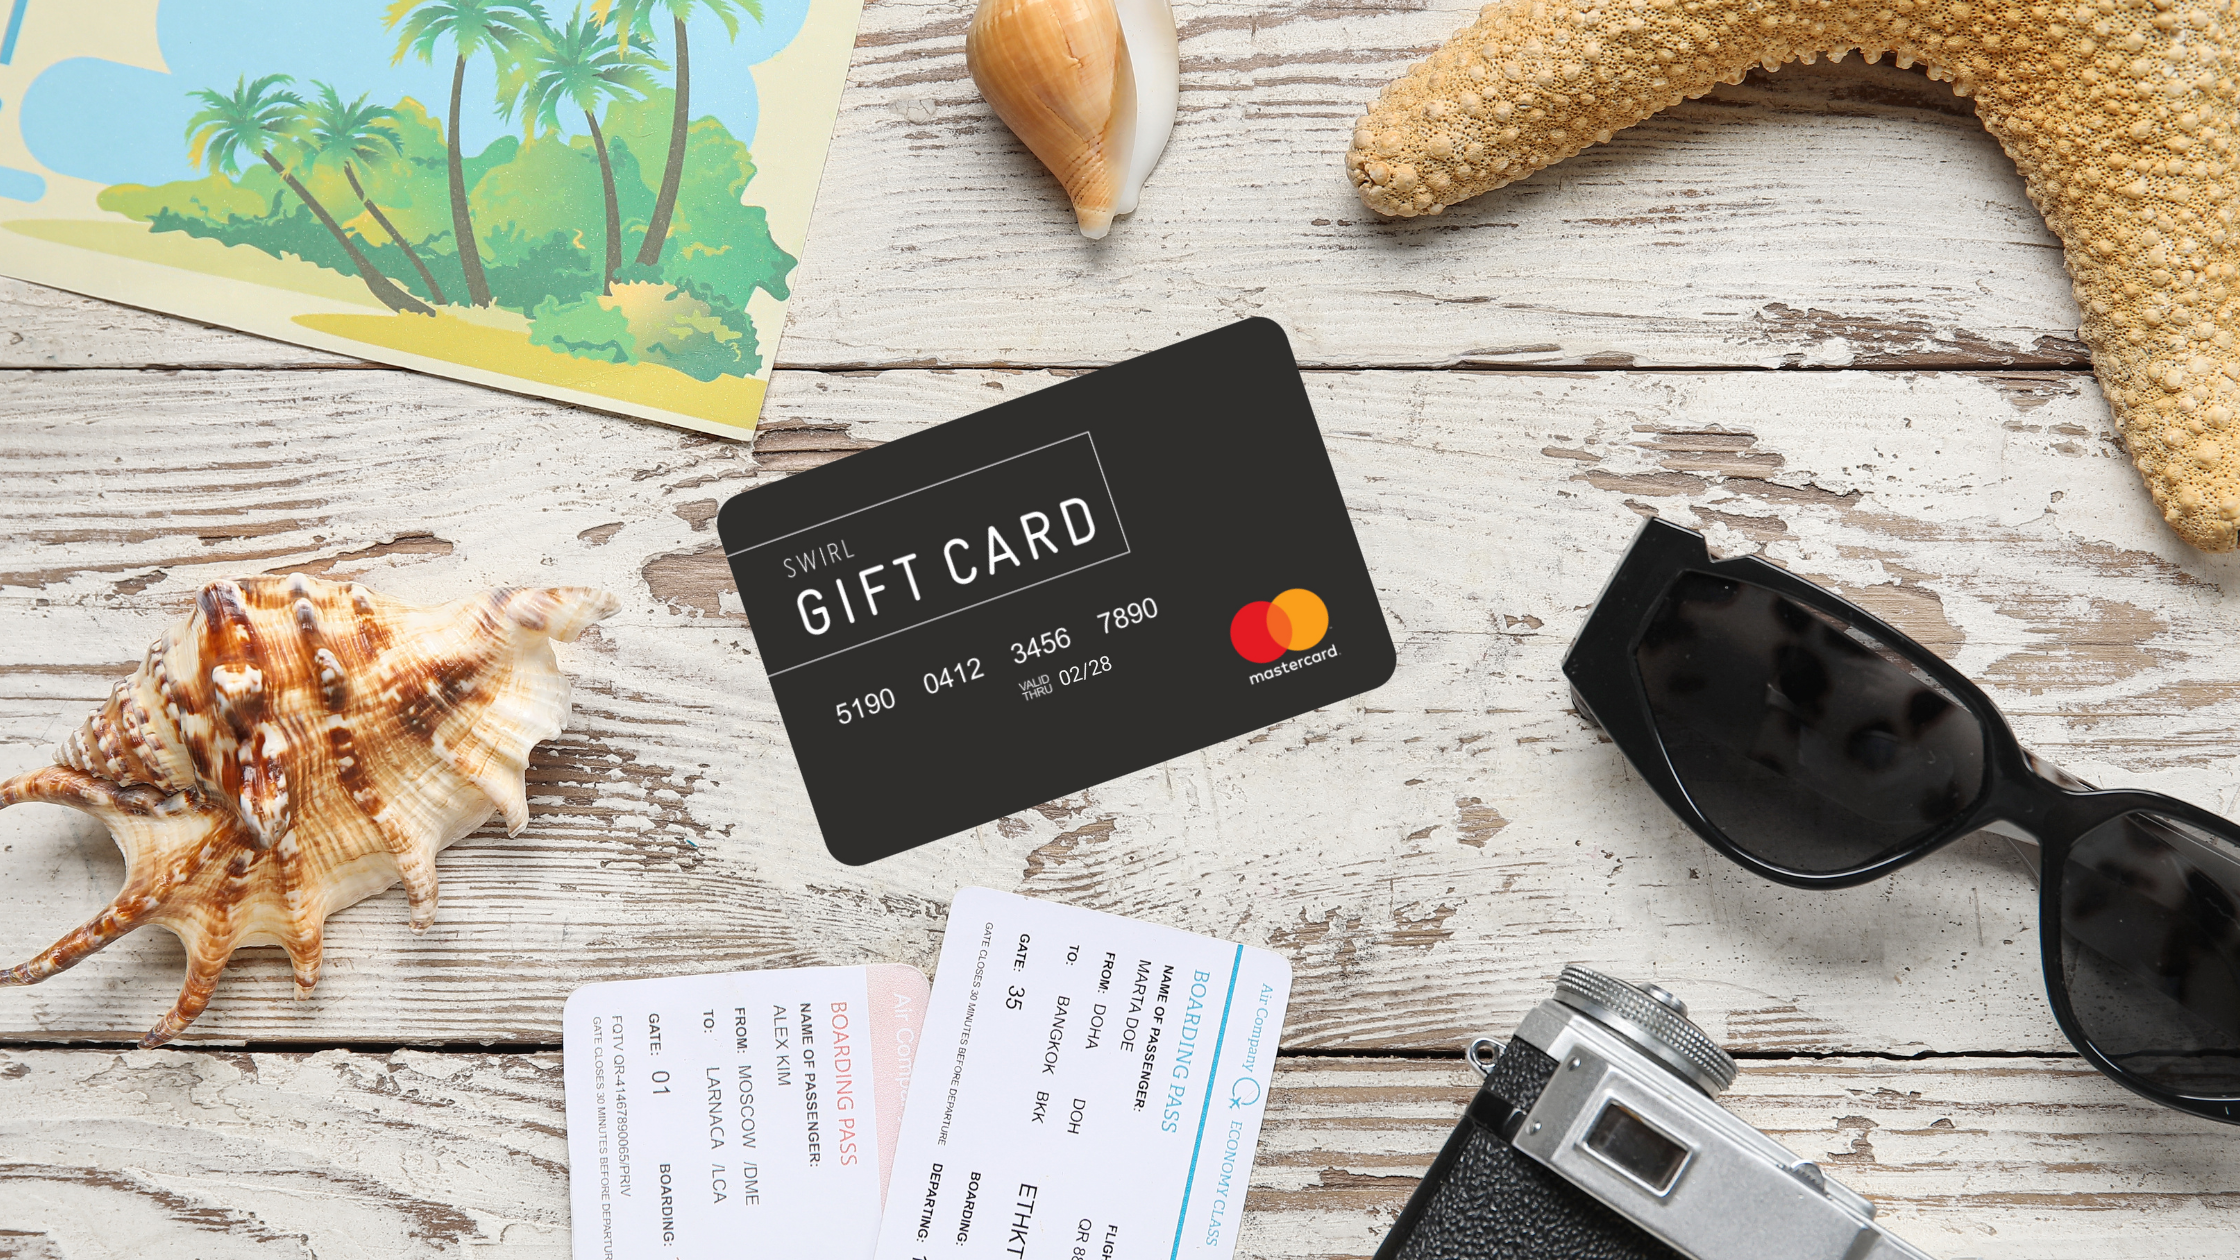 A black SWIRL Gift Card lying amidst travel essentials including boarding passes, a starfish, sunglasses, and a camera on a rustic wooden surface, suggesting preparation for a journey.